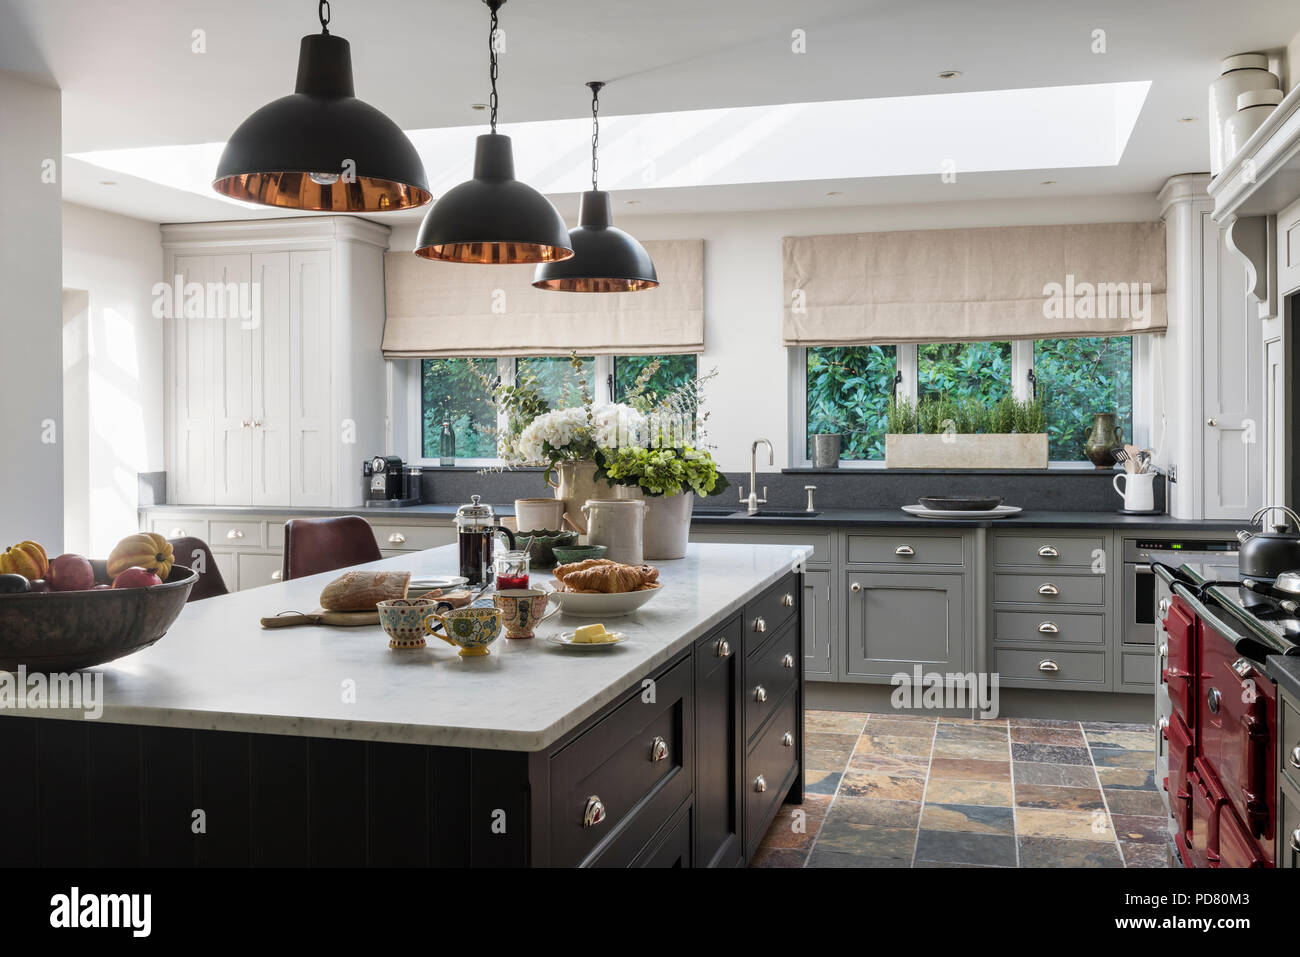 Bespoke kitchen island by Thomas Ford & Sons is painted in Tanner's Brown by Farrow & Ball. Industrial style pendant lights hang above Stock Photo